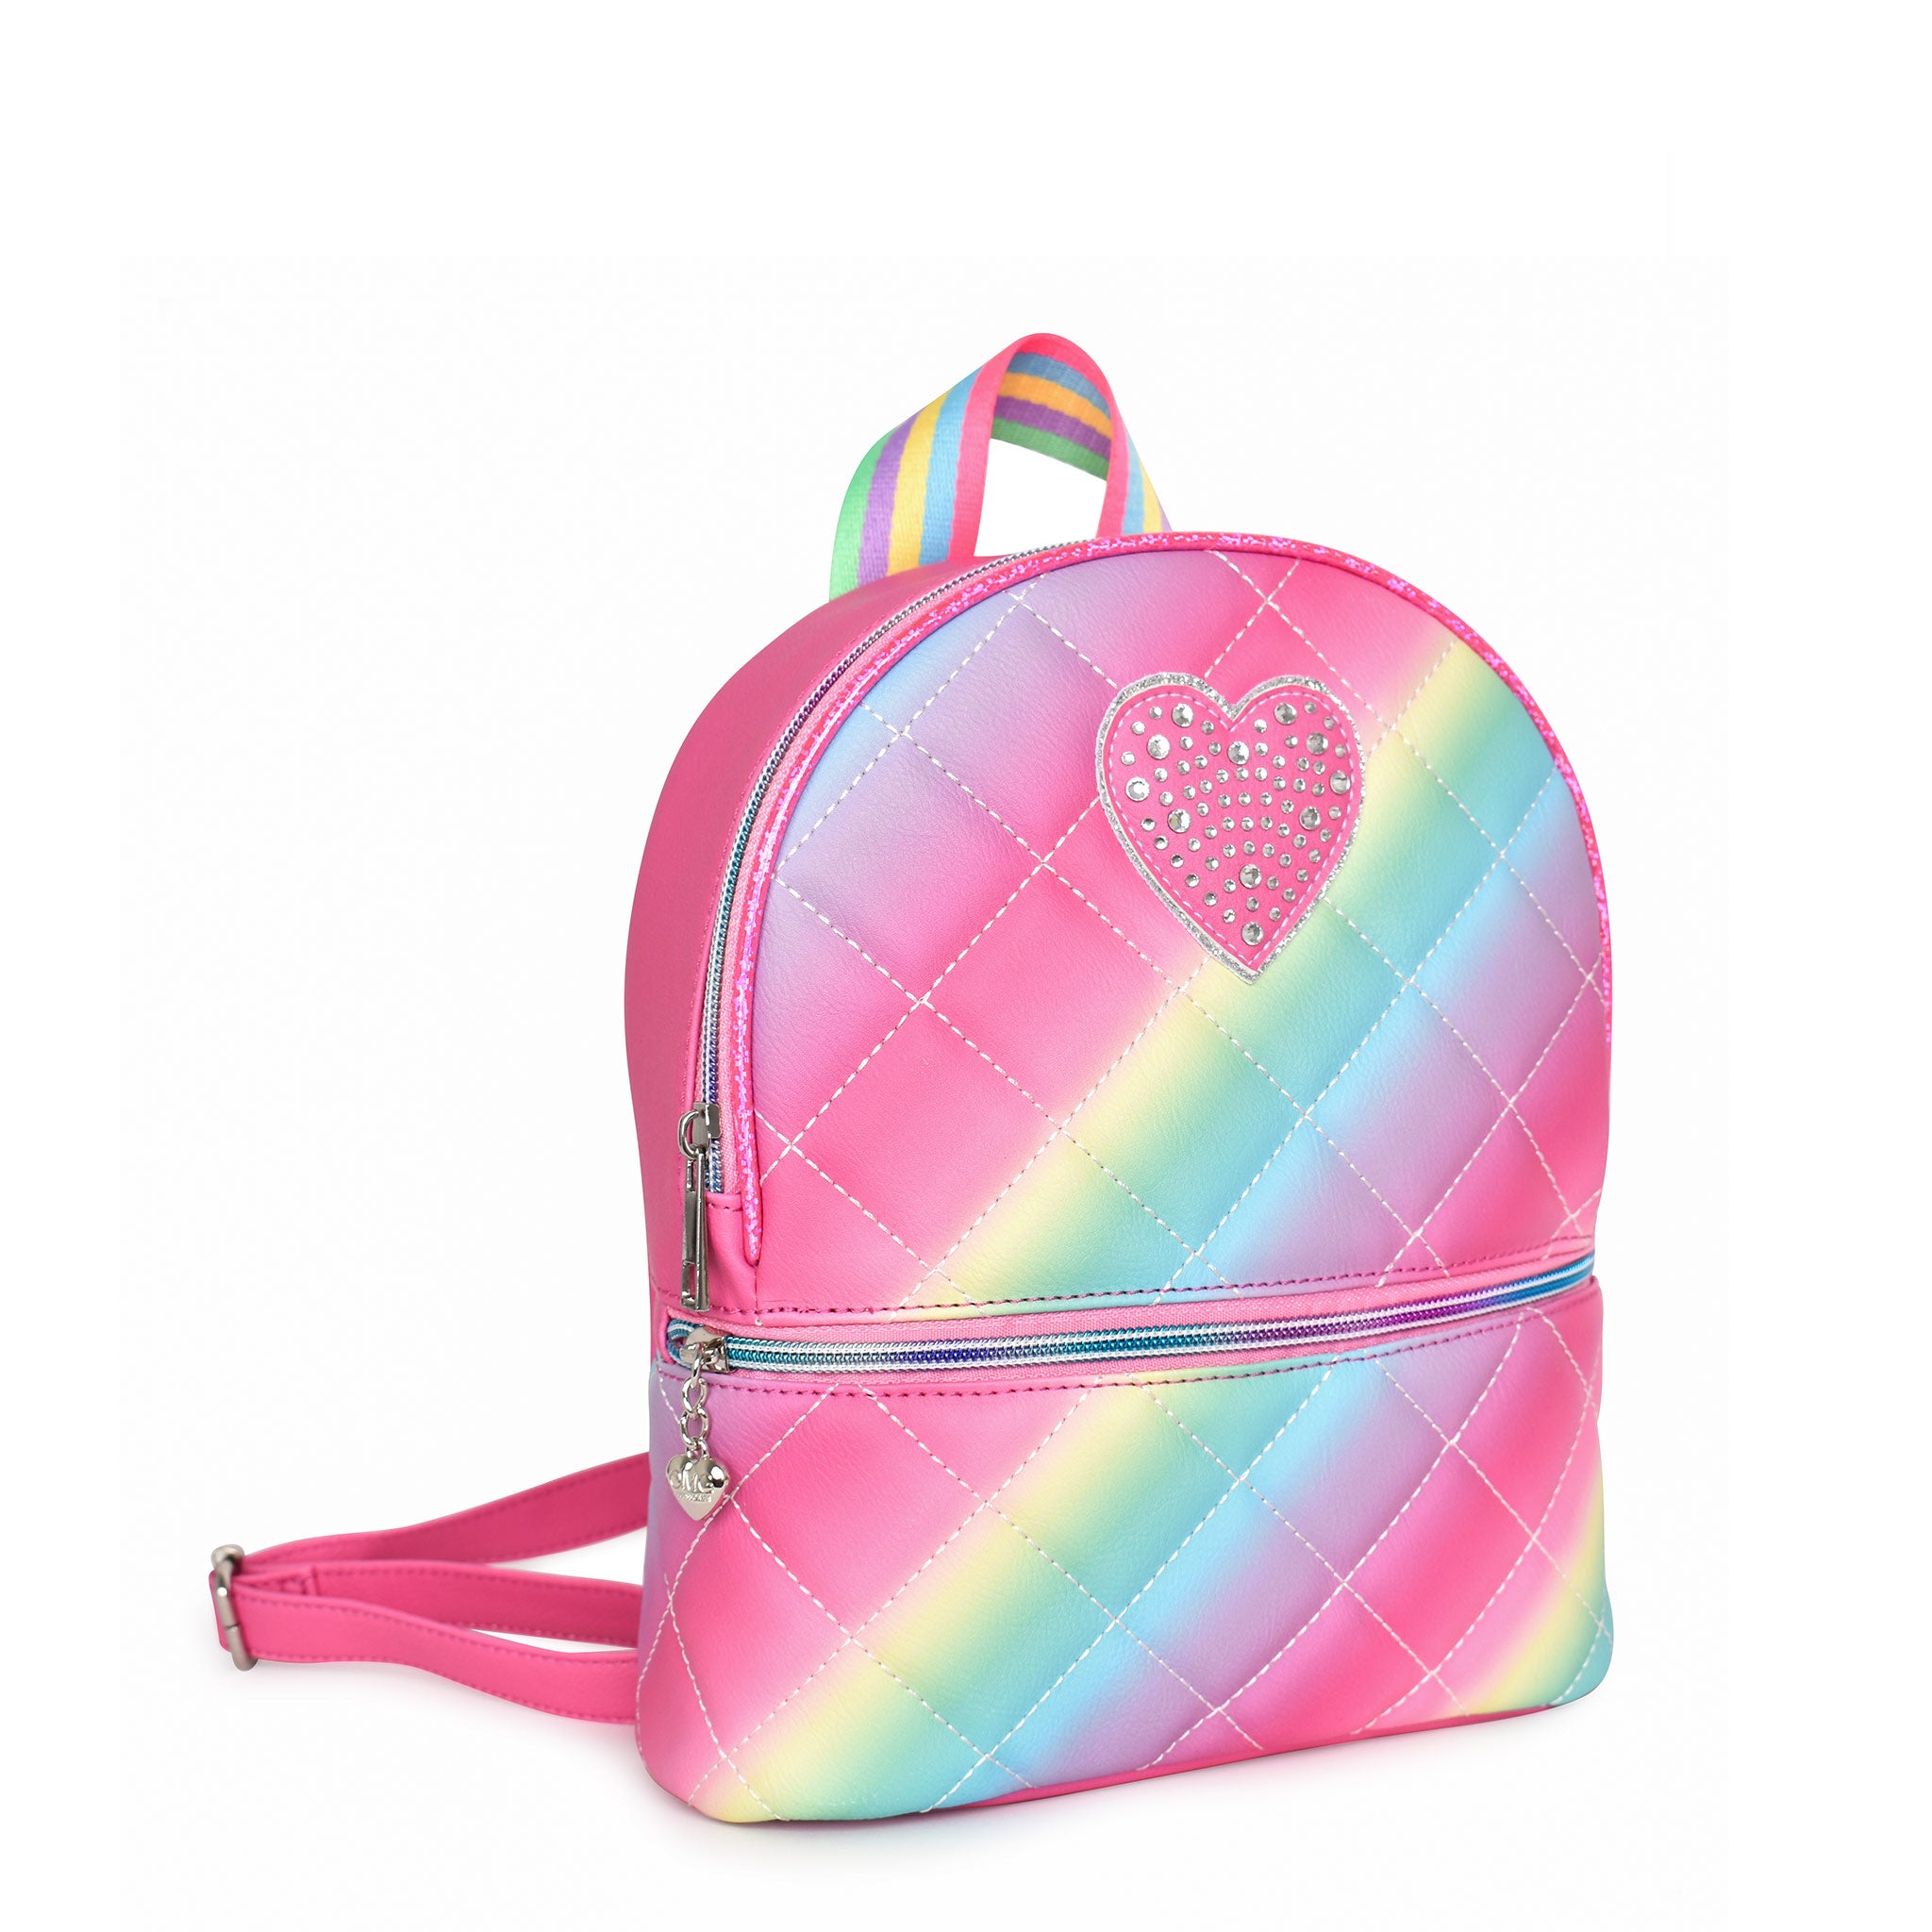 Side view of a rainbow ombre quilted mini backpack with a rhinestone heart appliqué